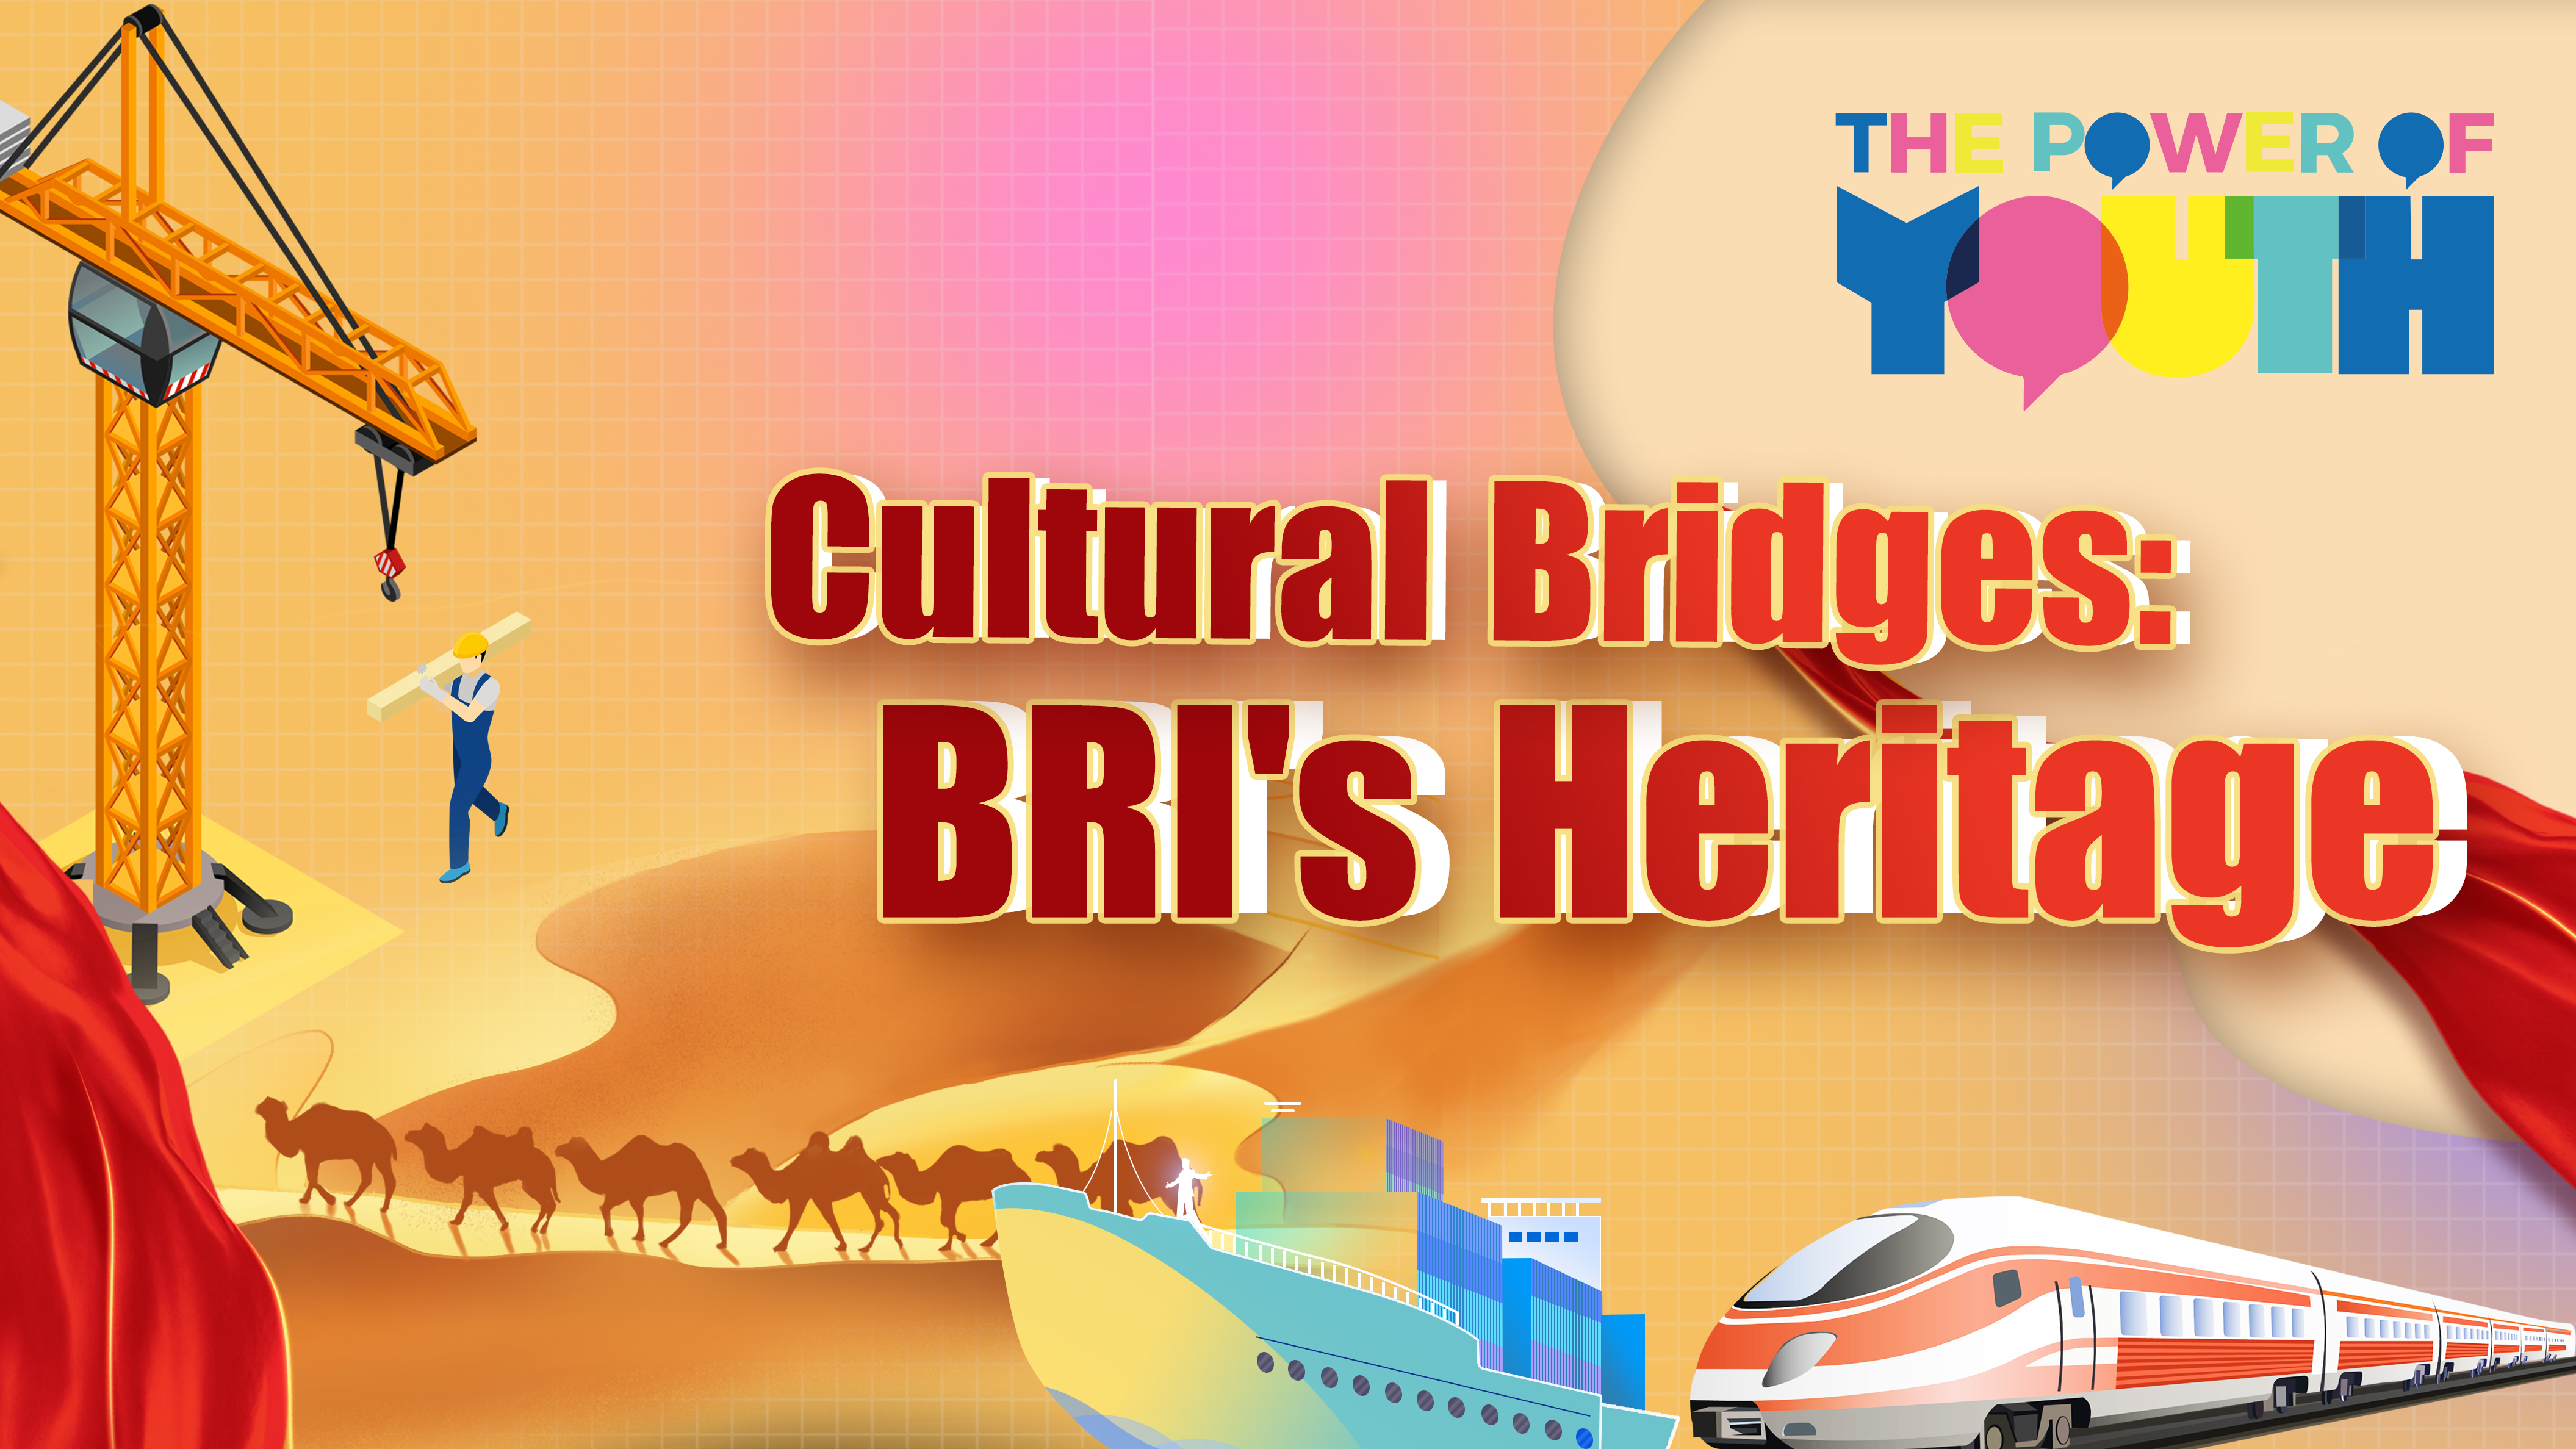 Watch: 'The Power of Youth' – Cultural Bridges: BRI's Heritage